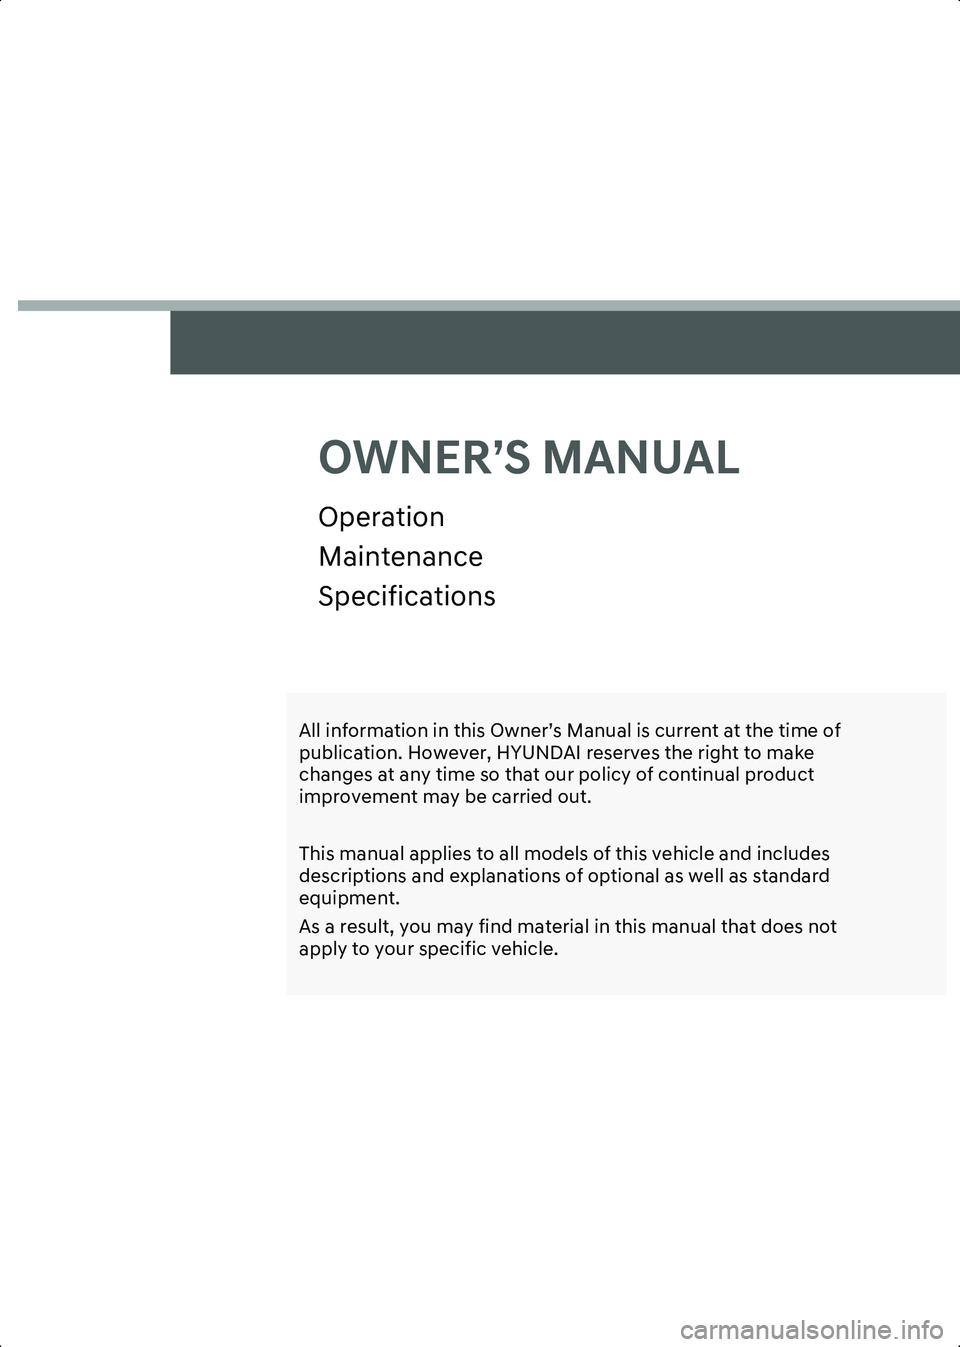 HYUNDAI IONIQ 6 2023  Owners Manual OWNER’S MANUAL
Operation
Maintenance
Specifications
All information in this Owner’s Manual is current at the time of 
publication. However, HYUNDAI reserves the right to make 
changes at any time 